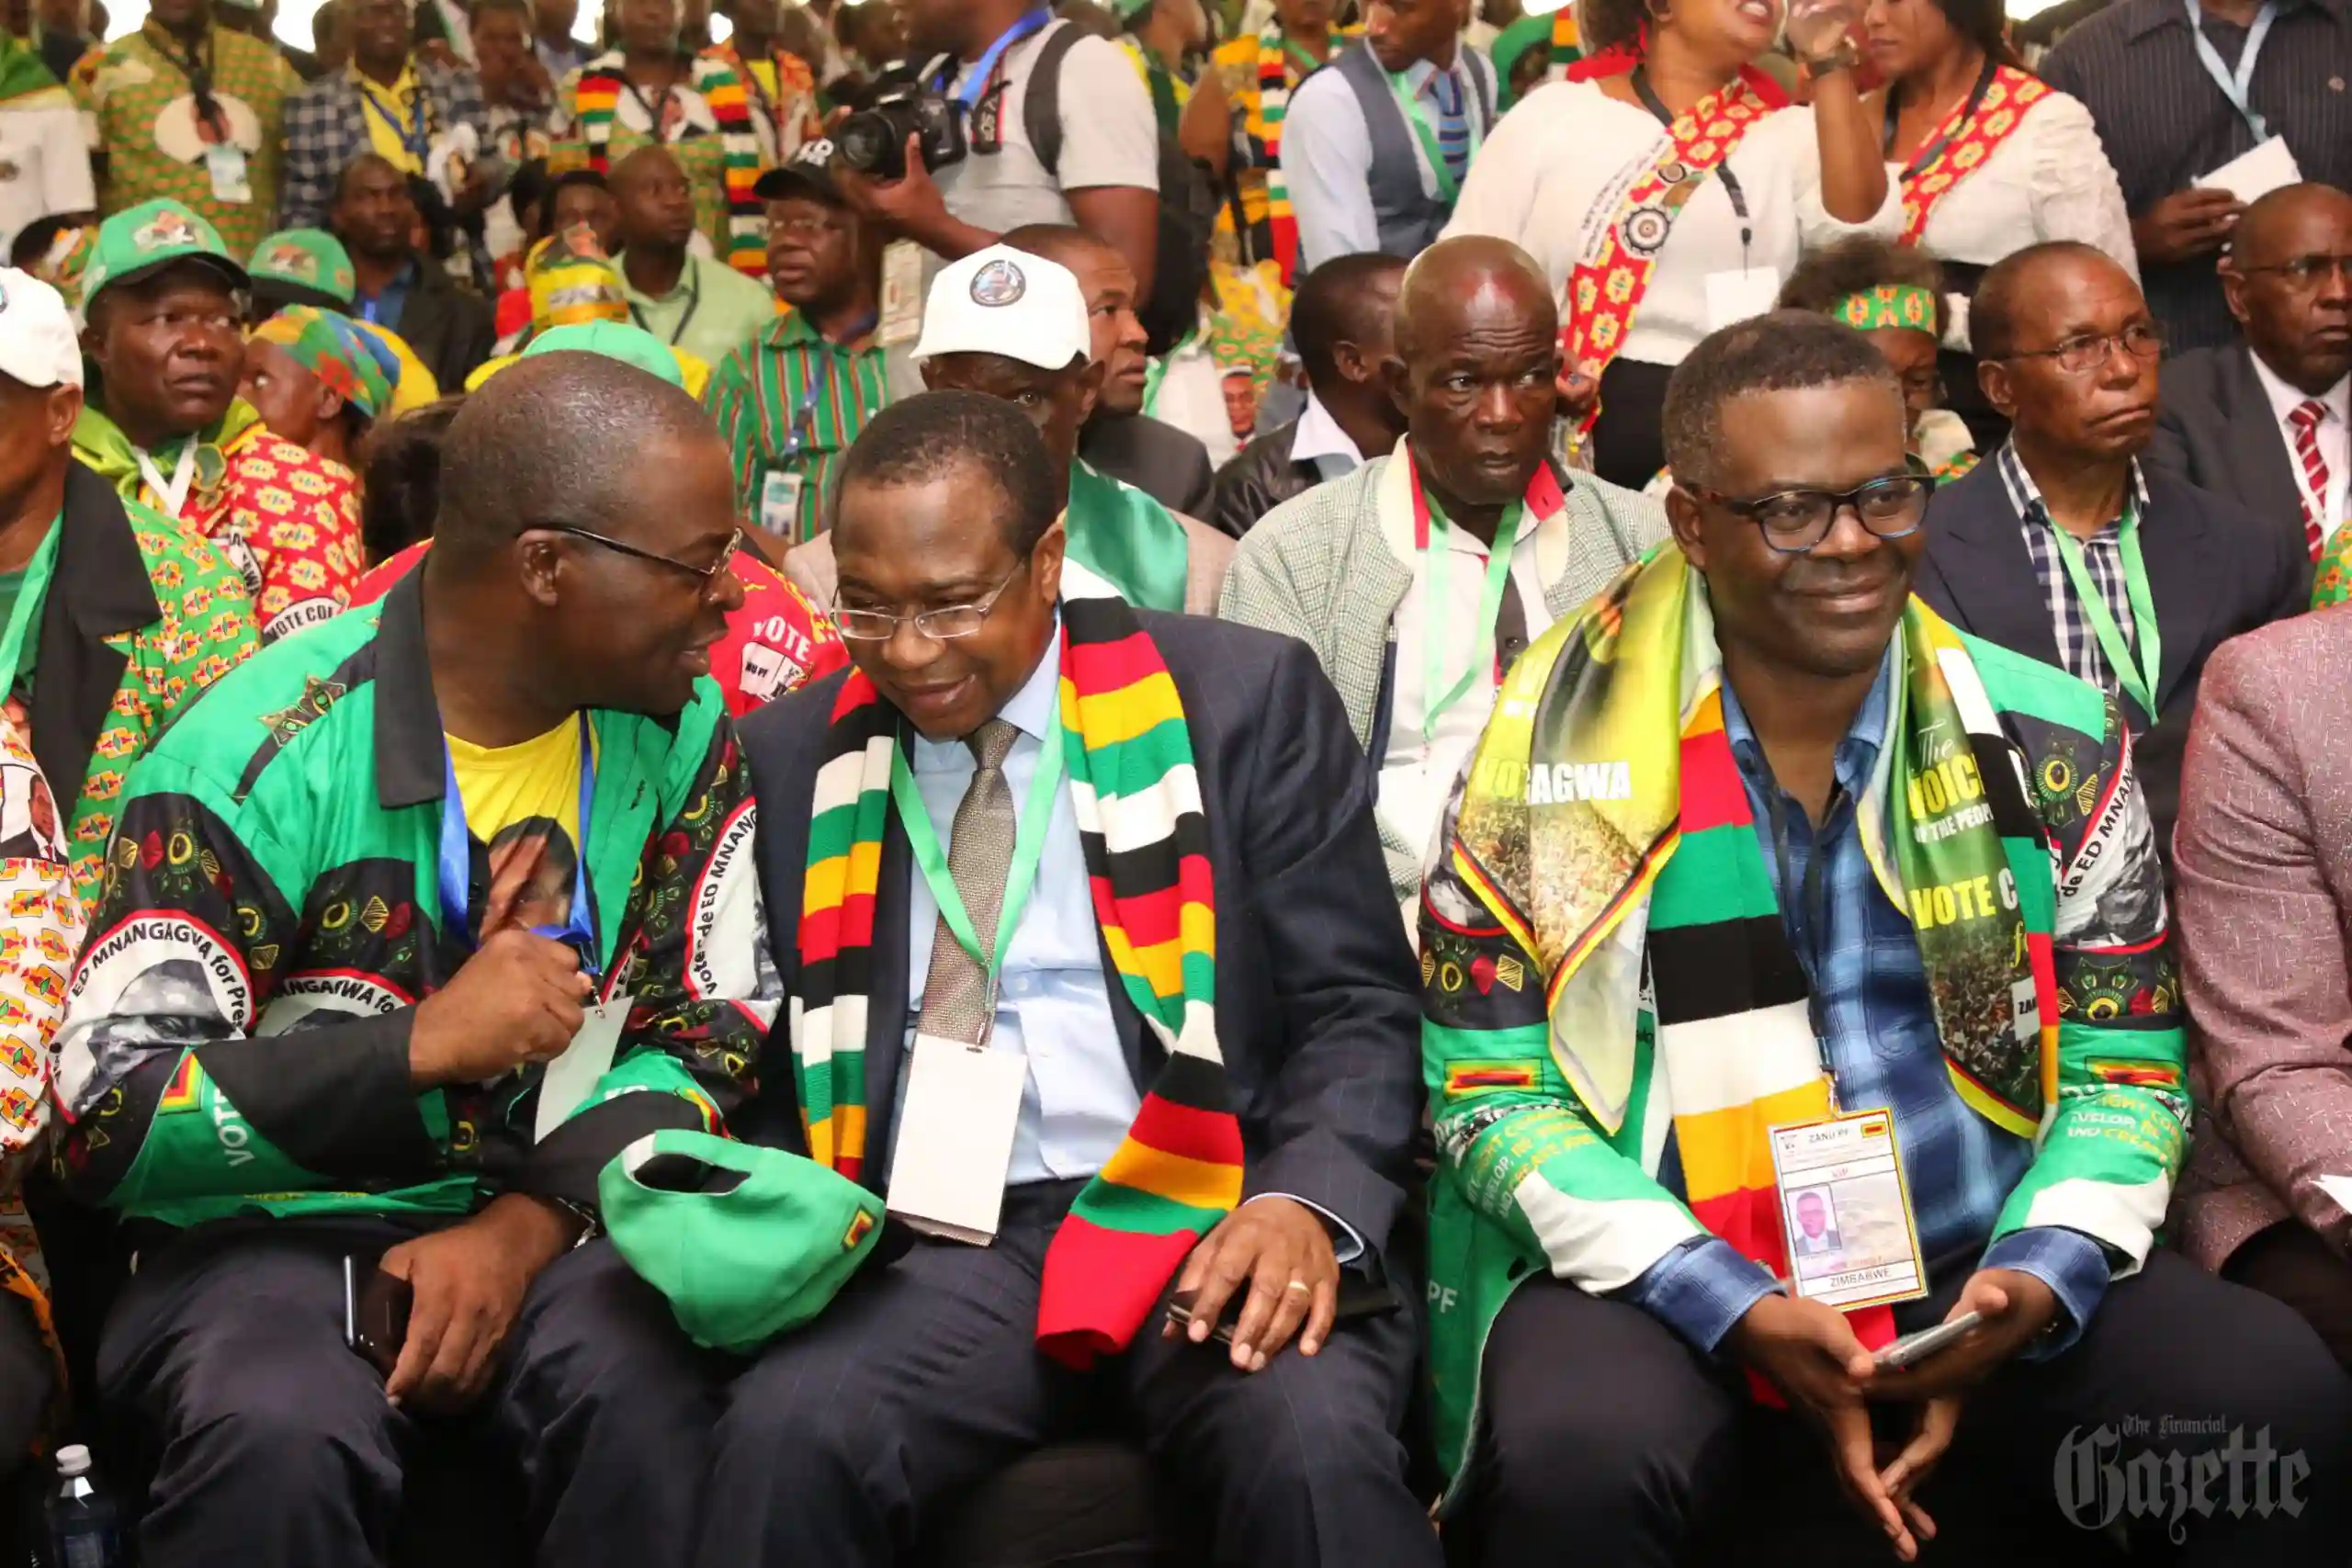 G40 Undermining The Party's Operations In Harare - Zanu PF